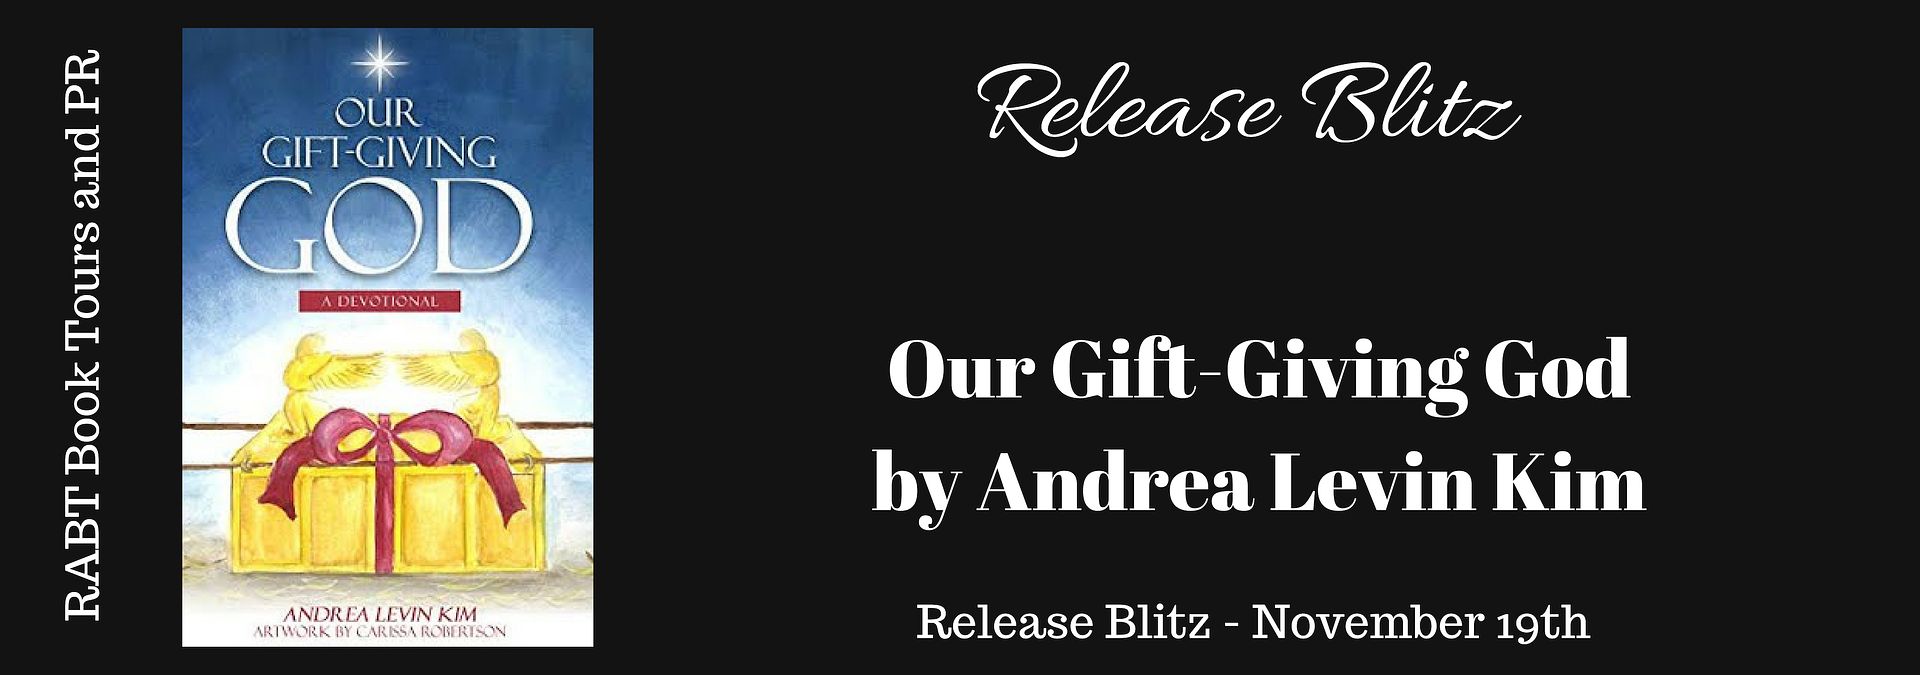 Release Blitz: Our Gift-Giving God